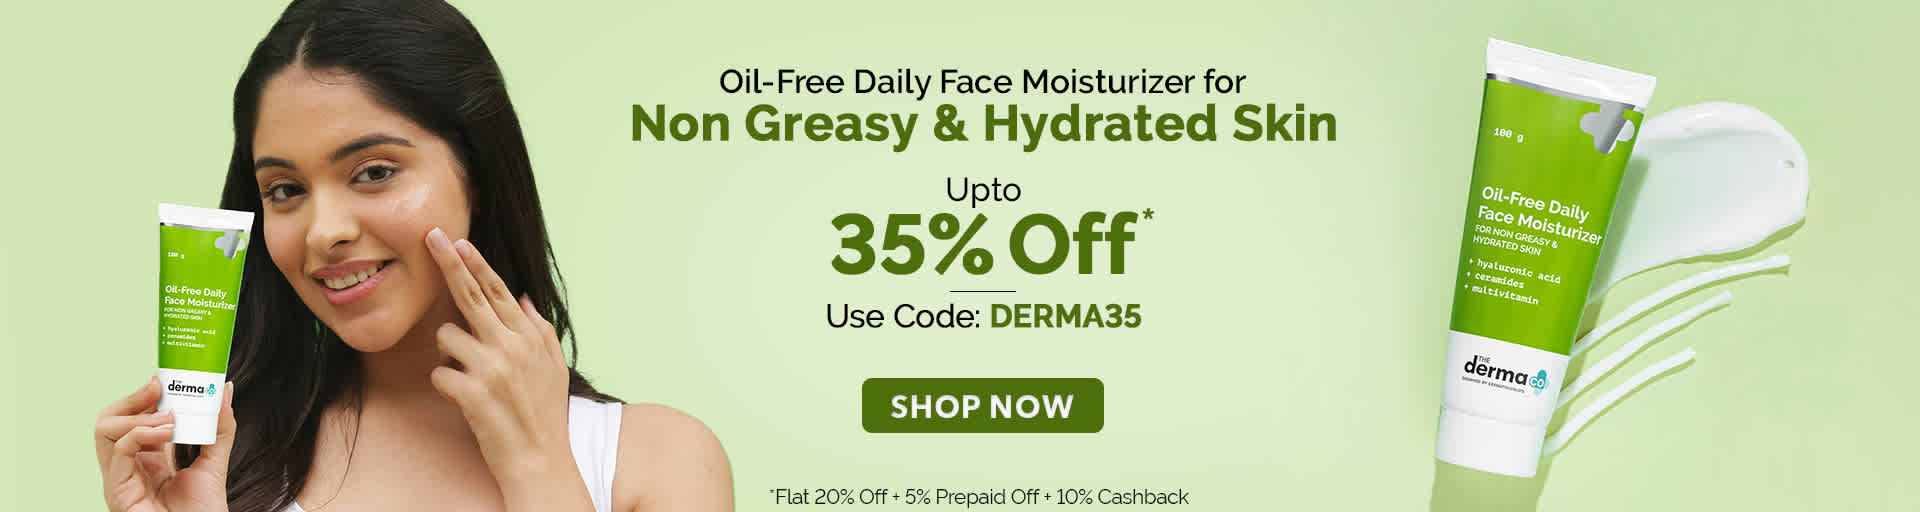 Oil-Free Daily Face Moisturizer